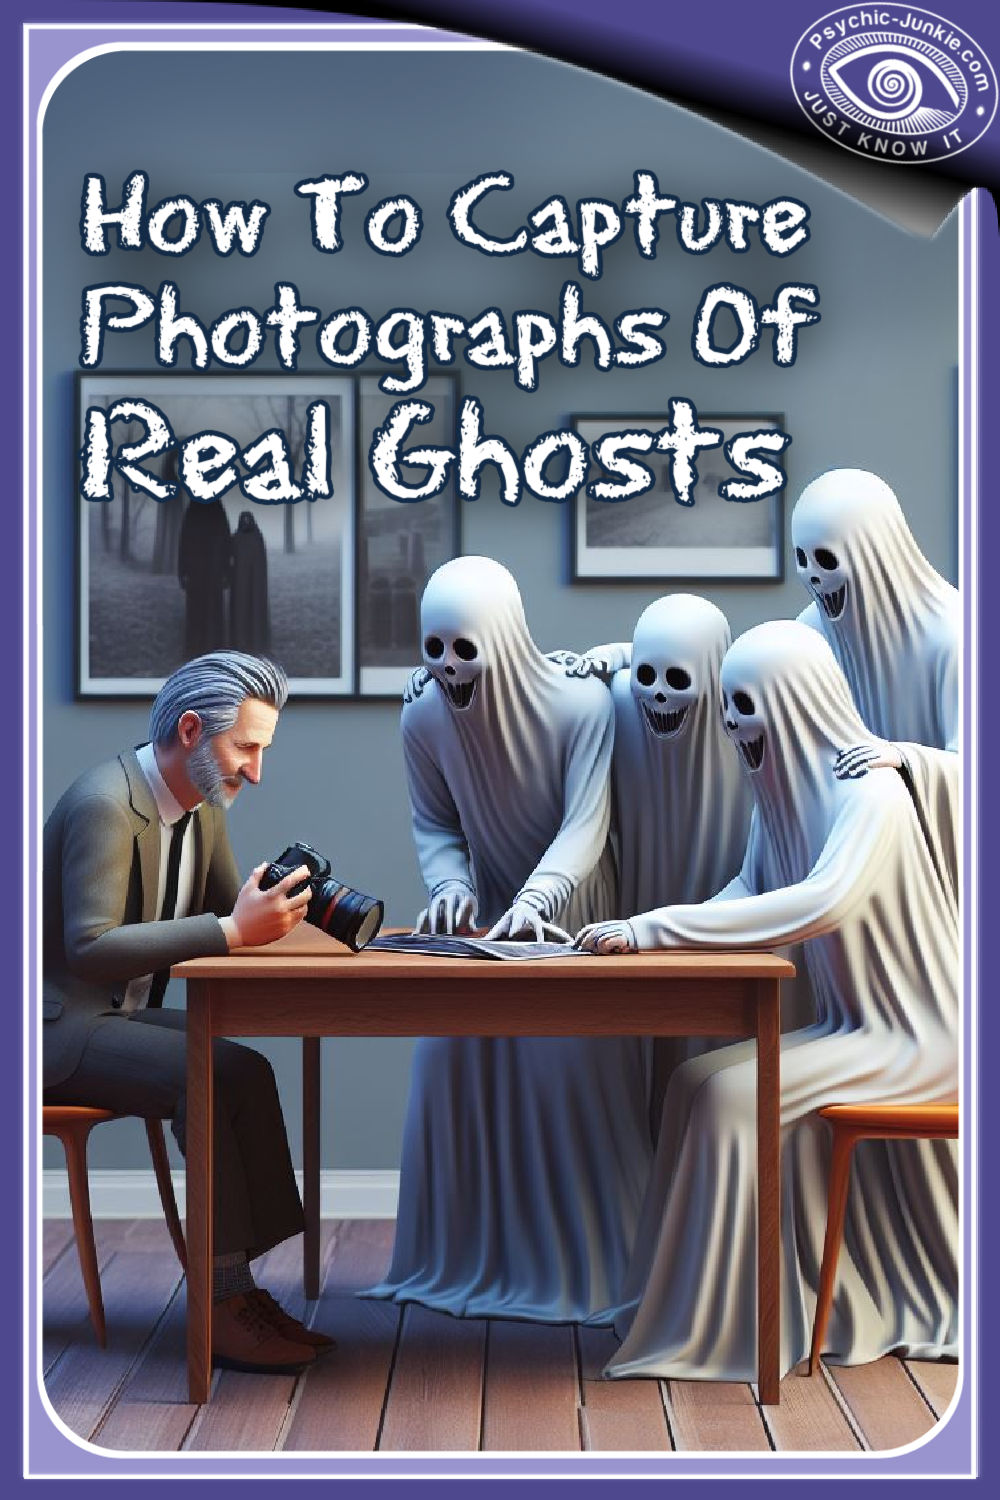 How To Capture Photographs Of Ghosts